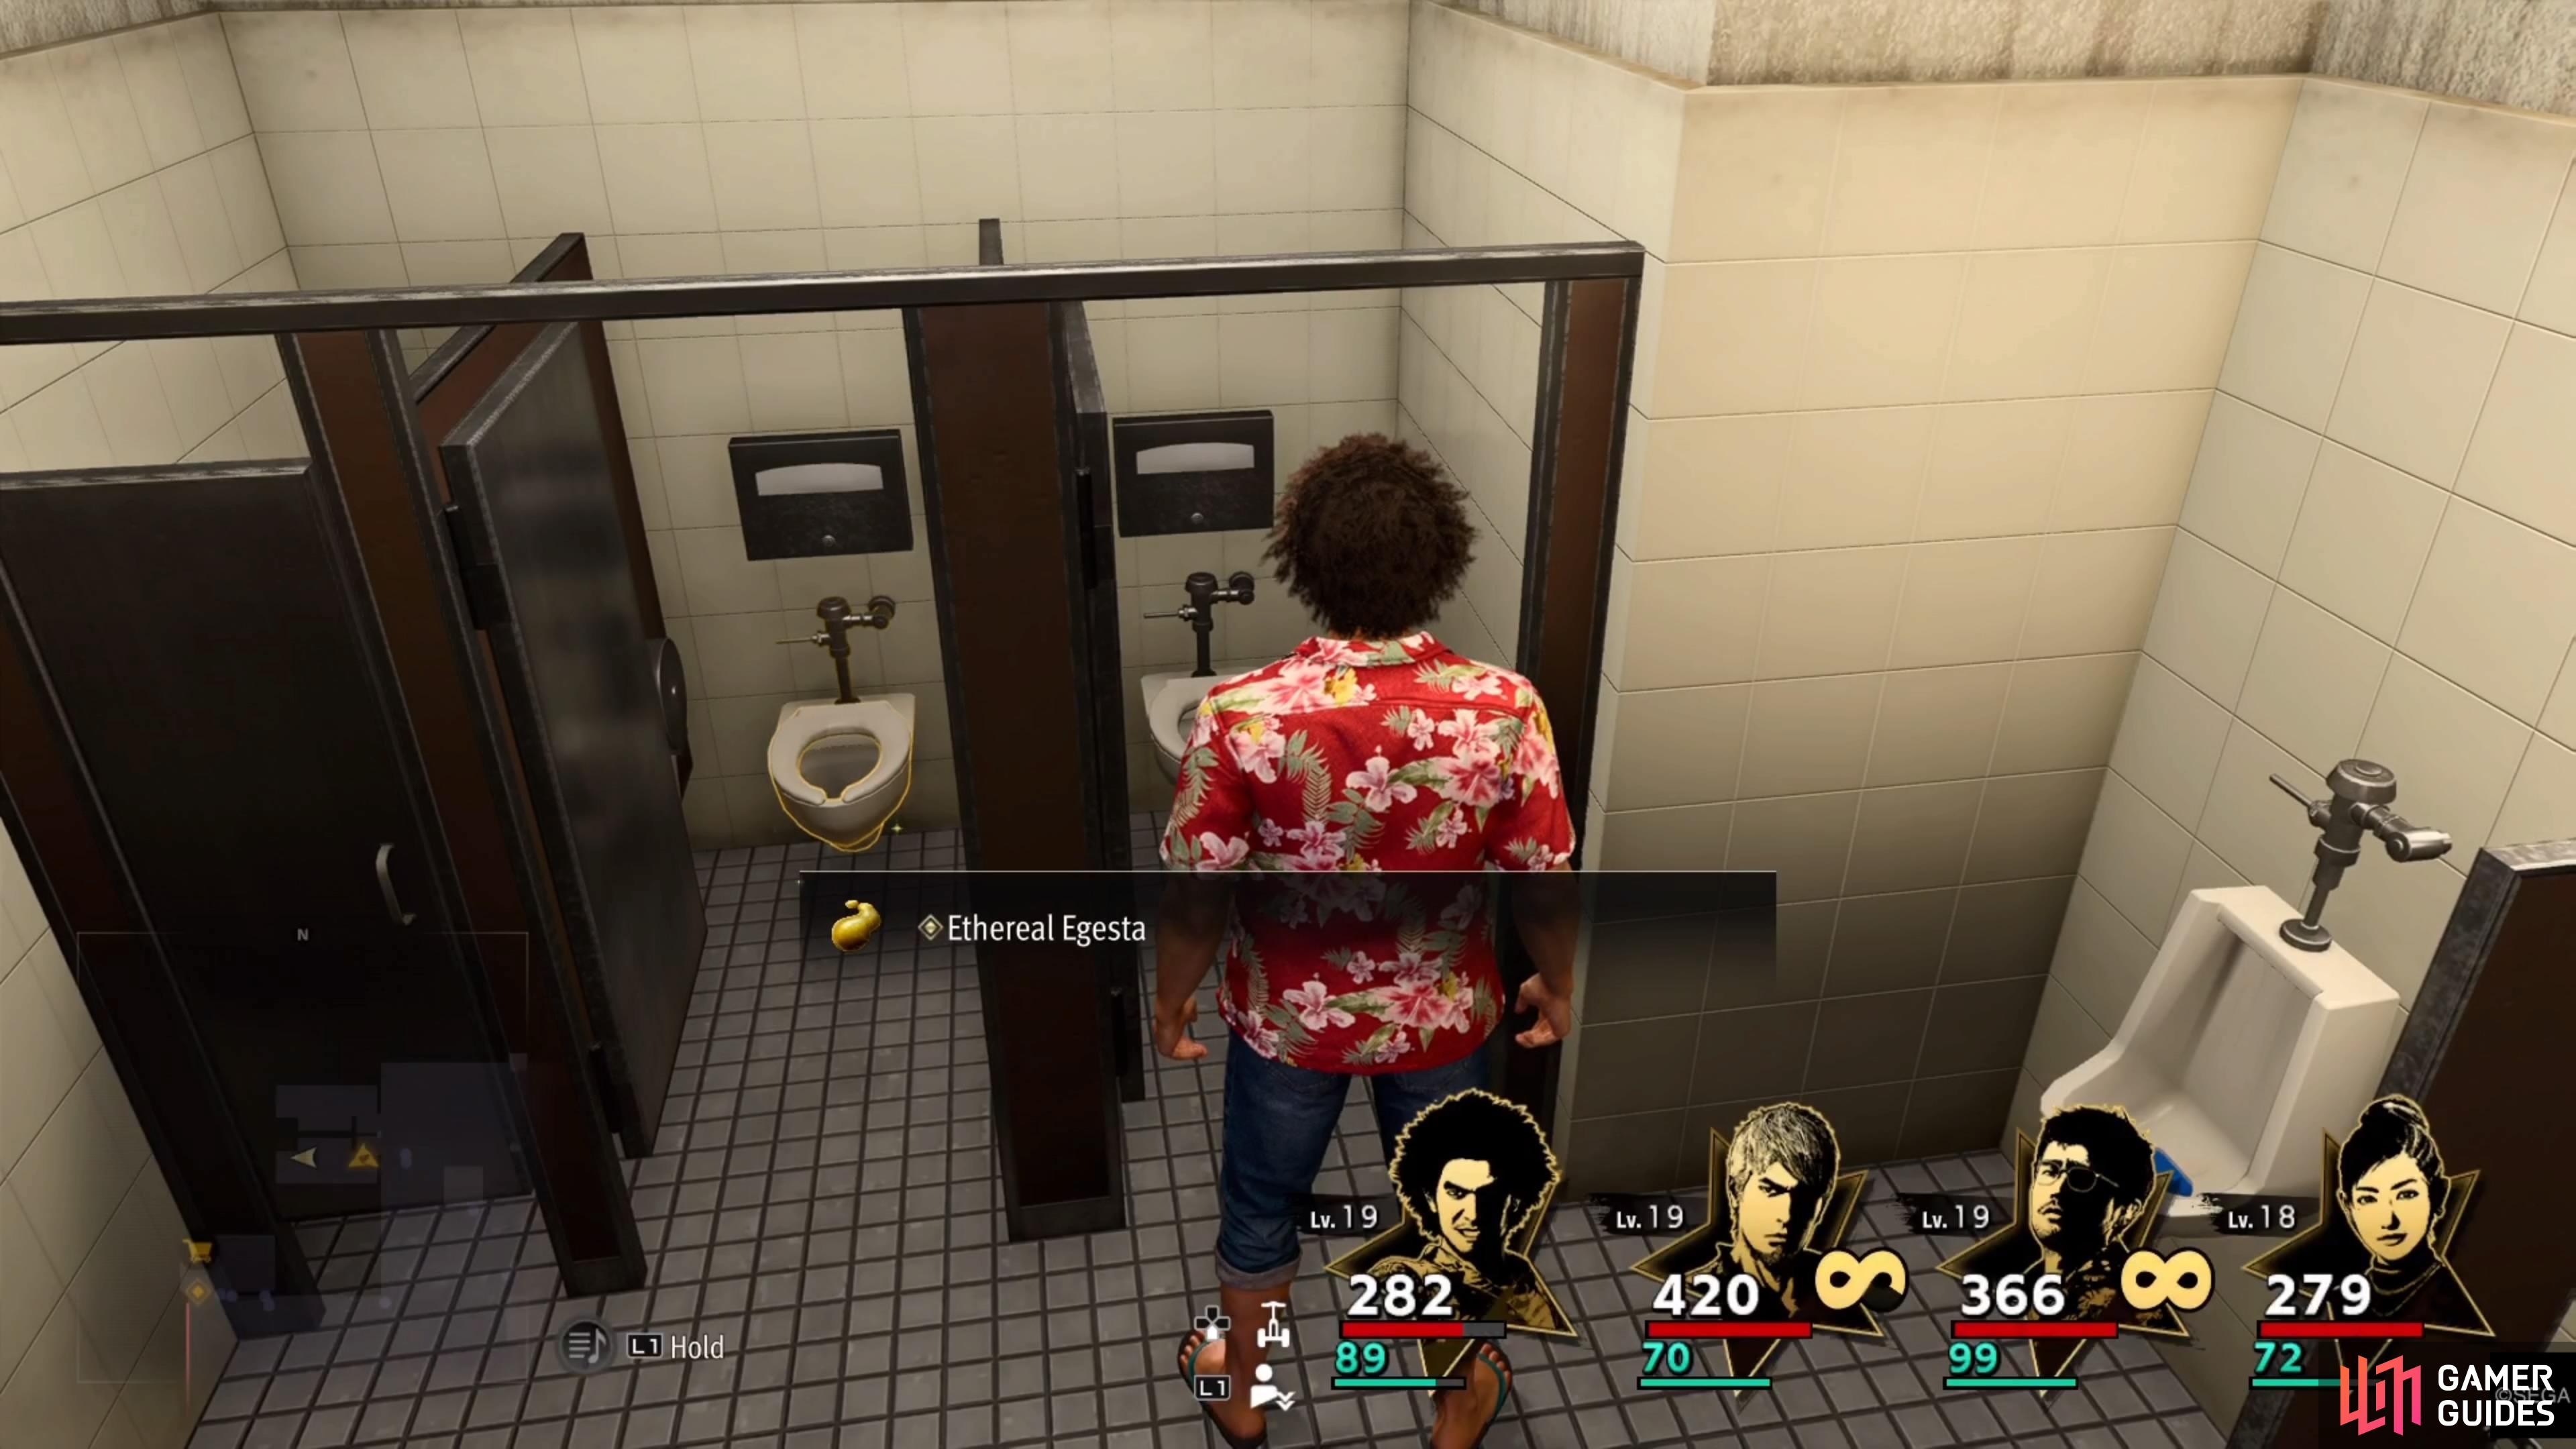 Yep, you need to get an item out of a toilet for this trophy/achievement.